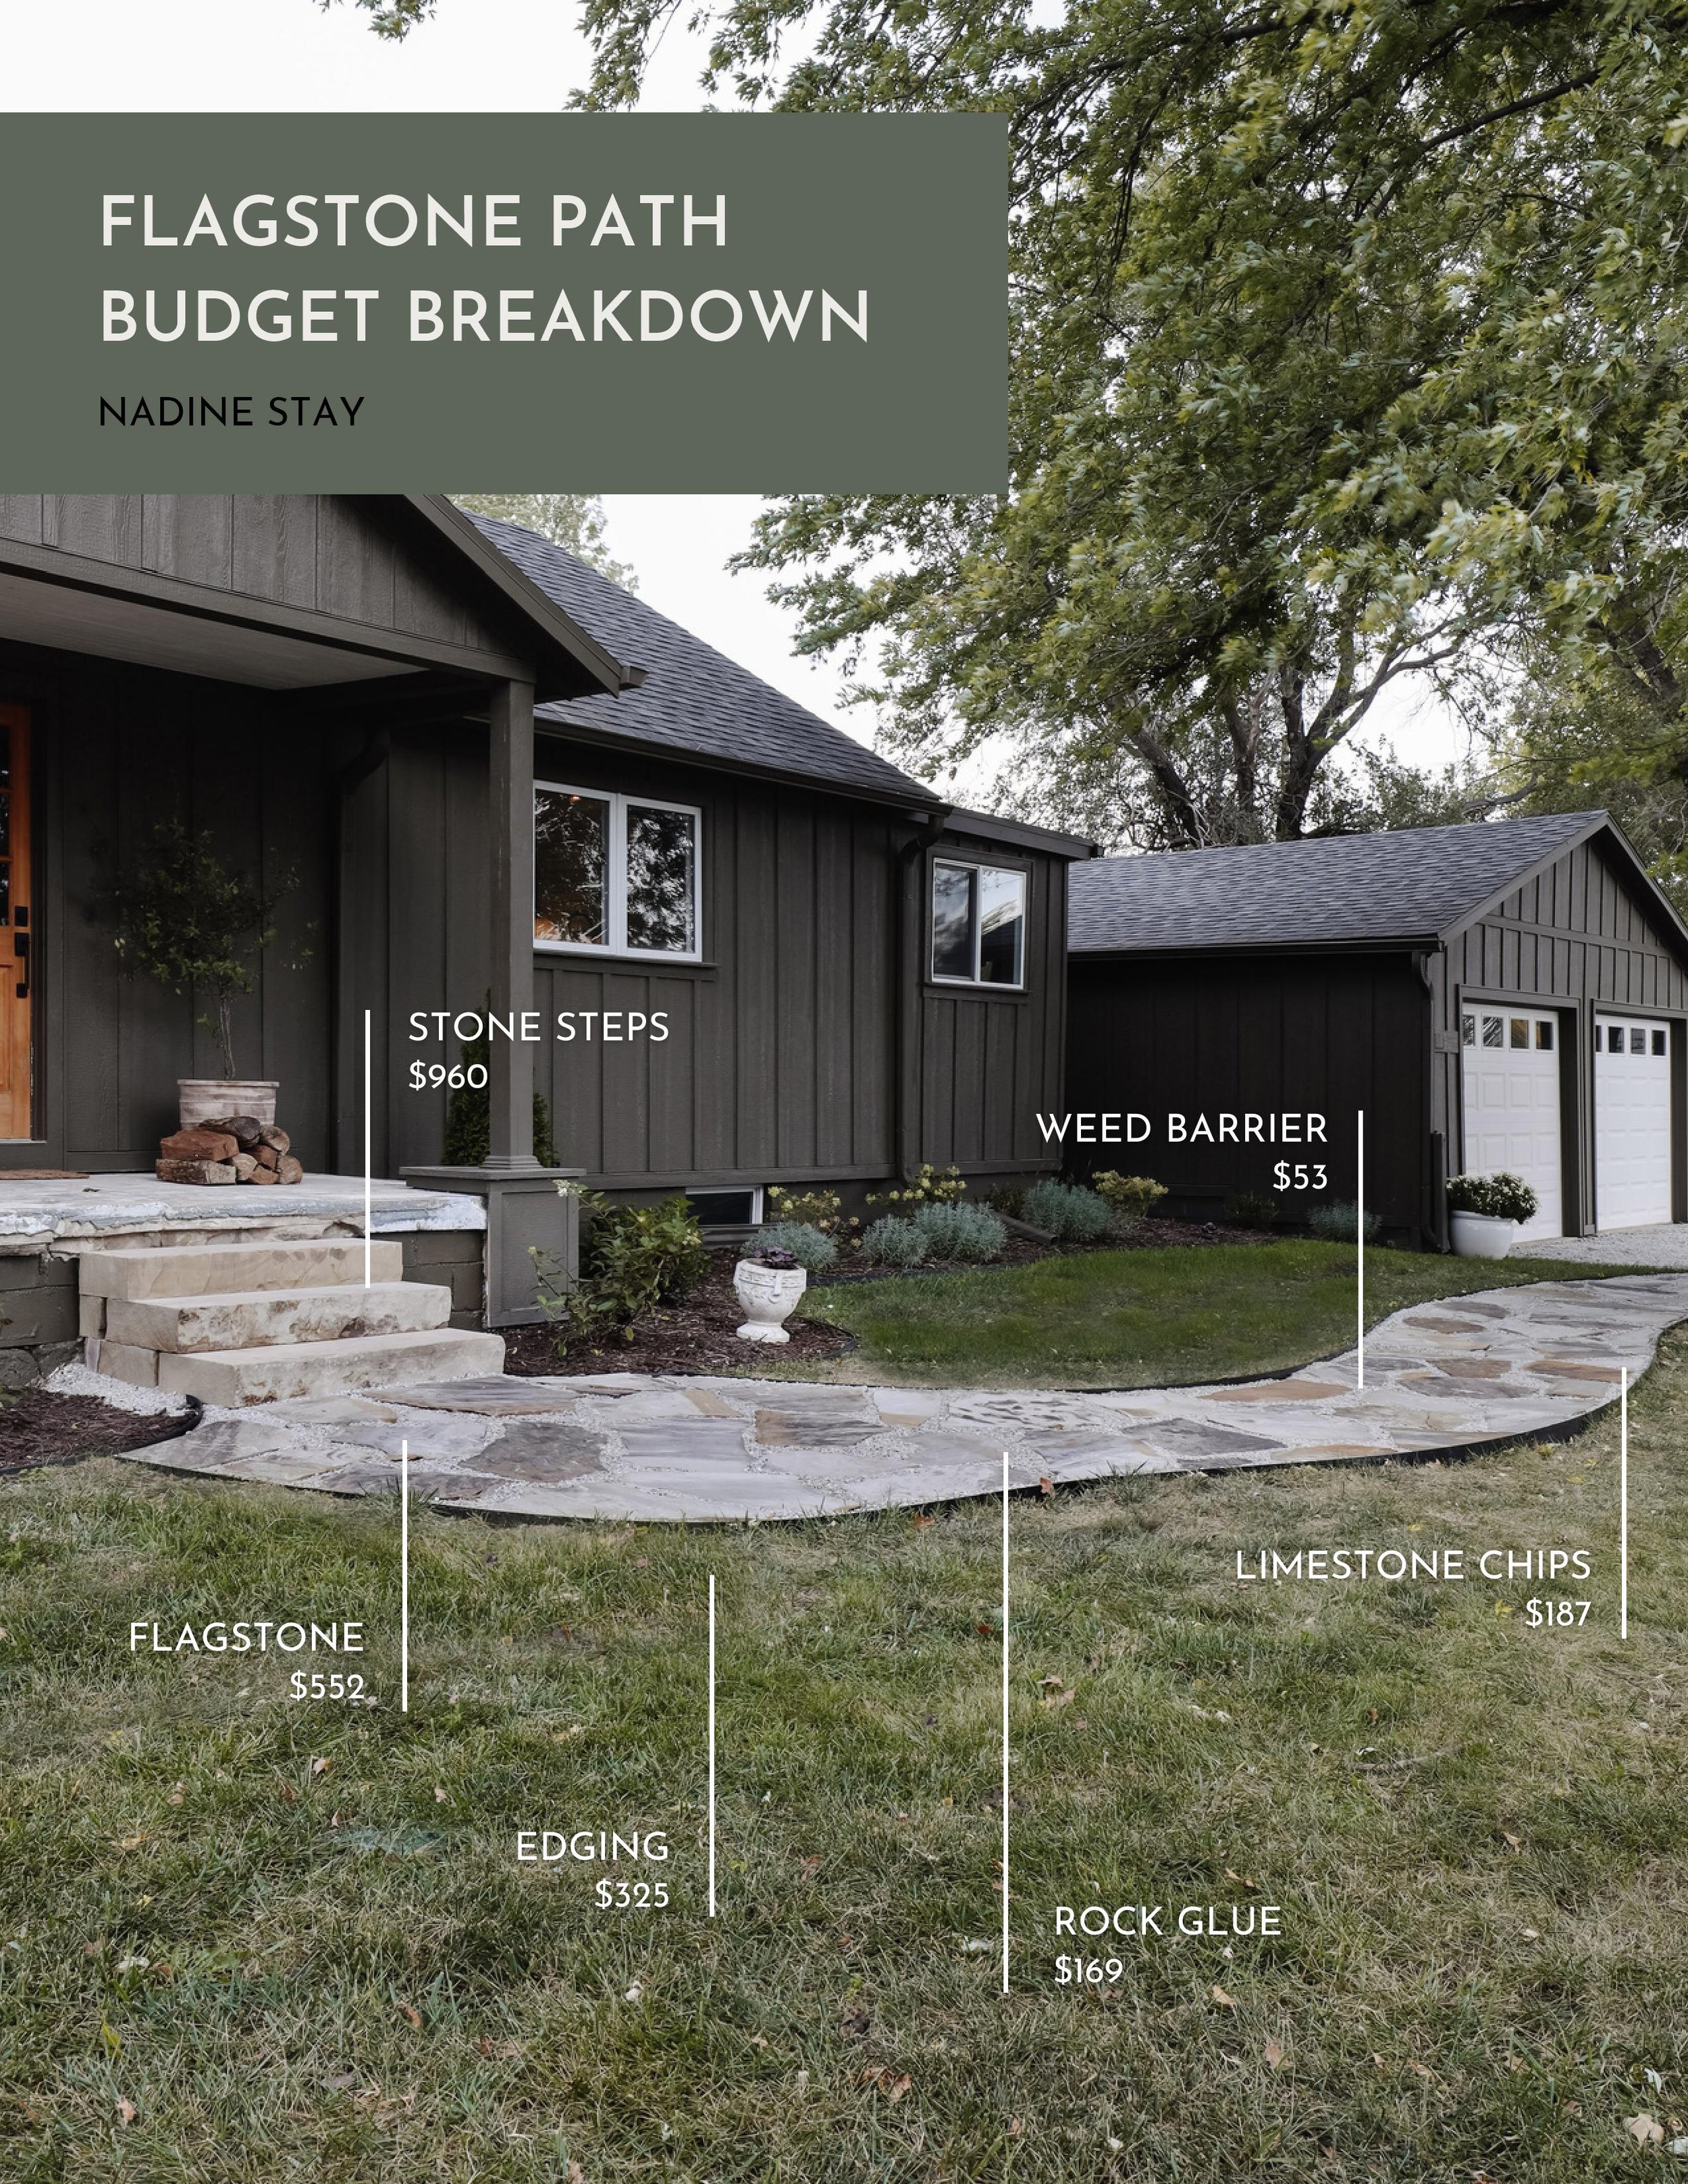 How much do flagstone paths cost? A budget breakdown of our flagstone path. Foxglove flagstone and limestone chip path cost. How much do stone steps cost? | Nadine Stay